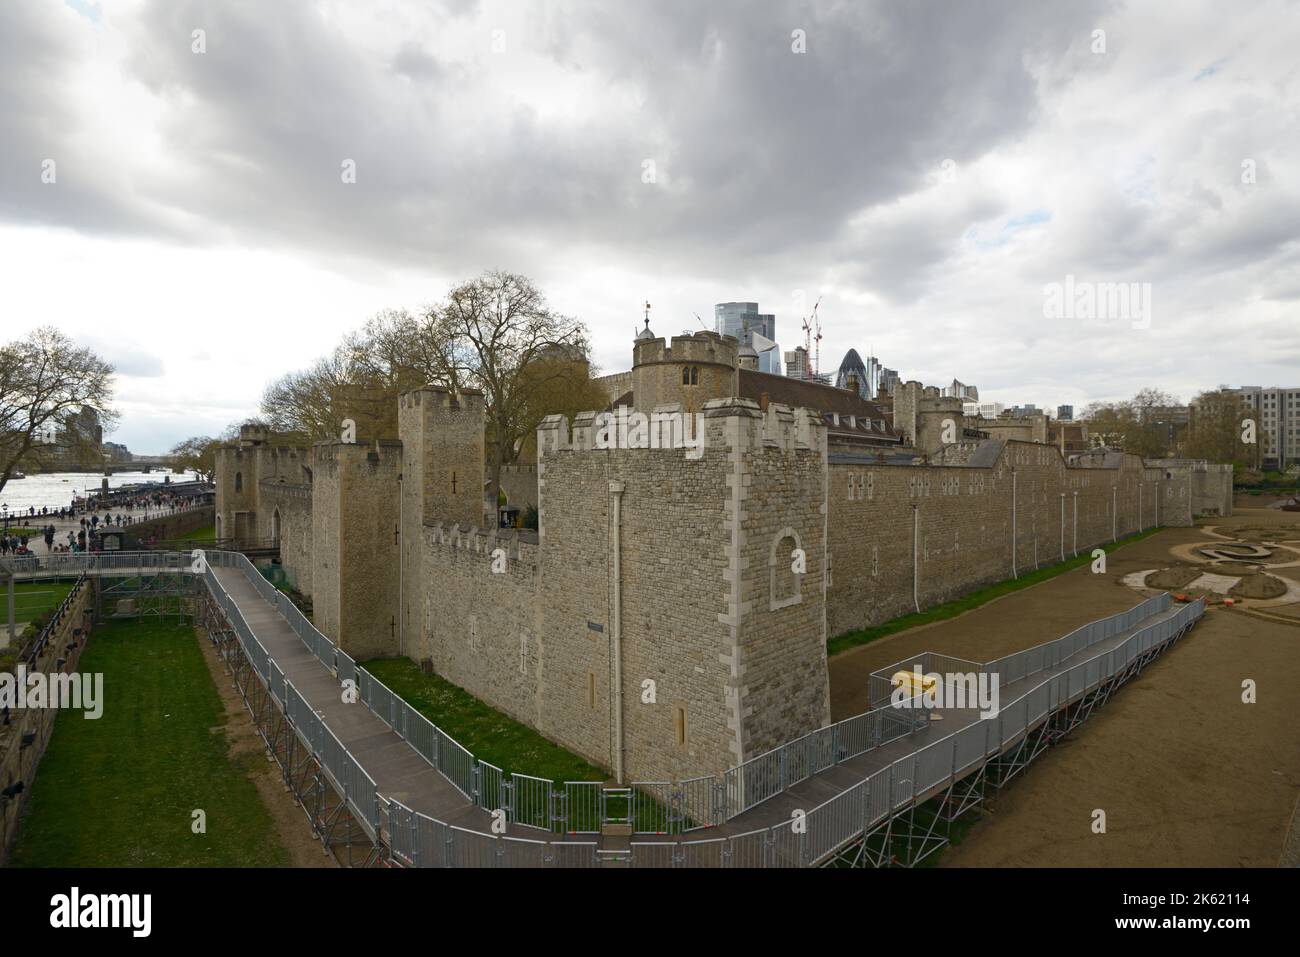 The historic Tower of London. Stock Photo